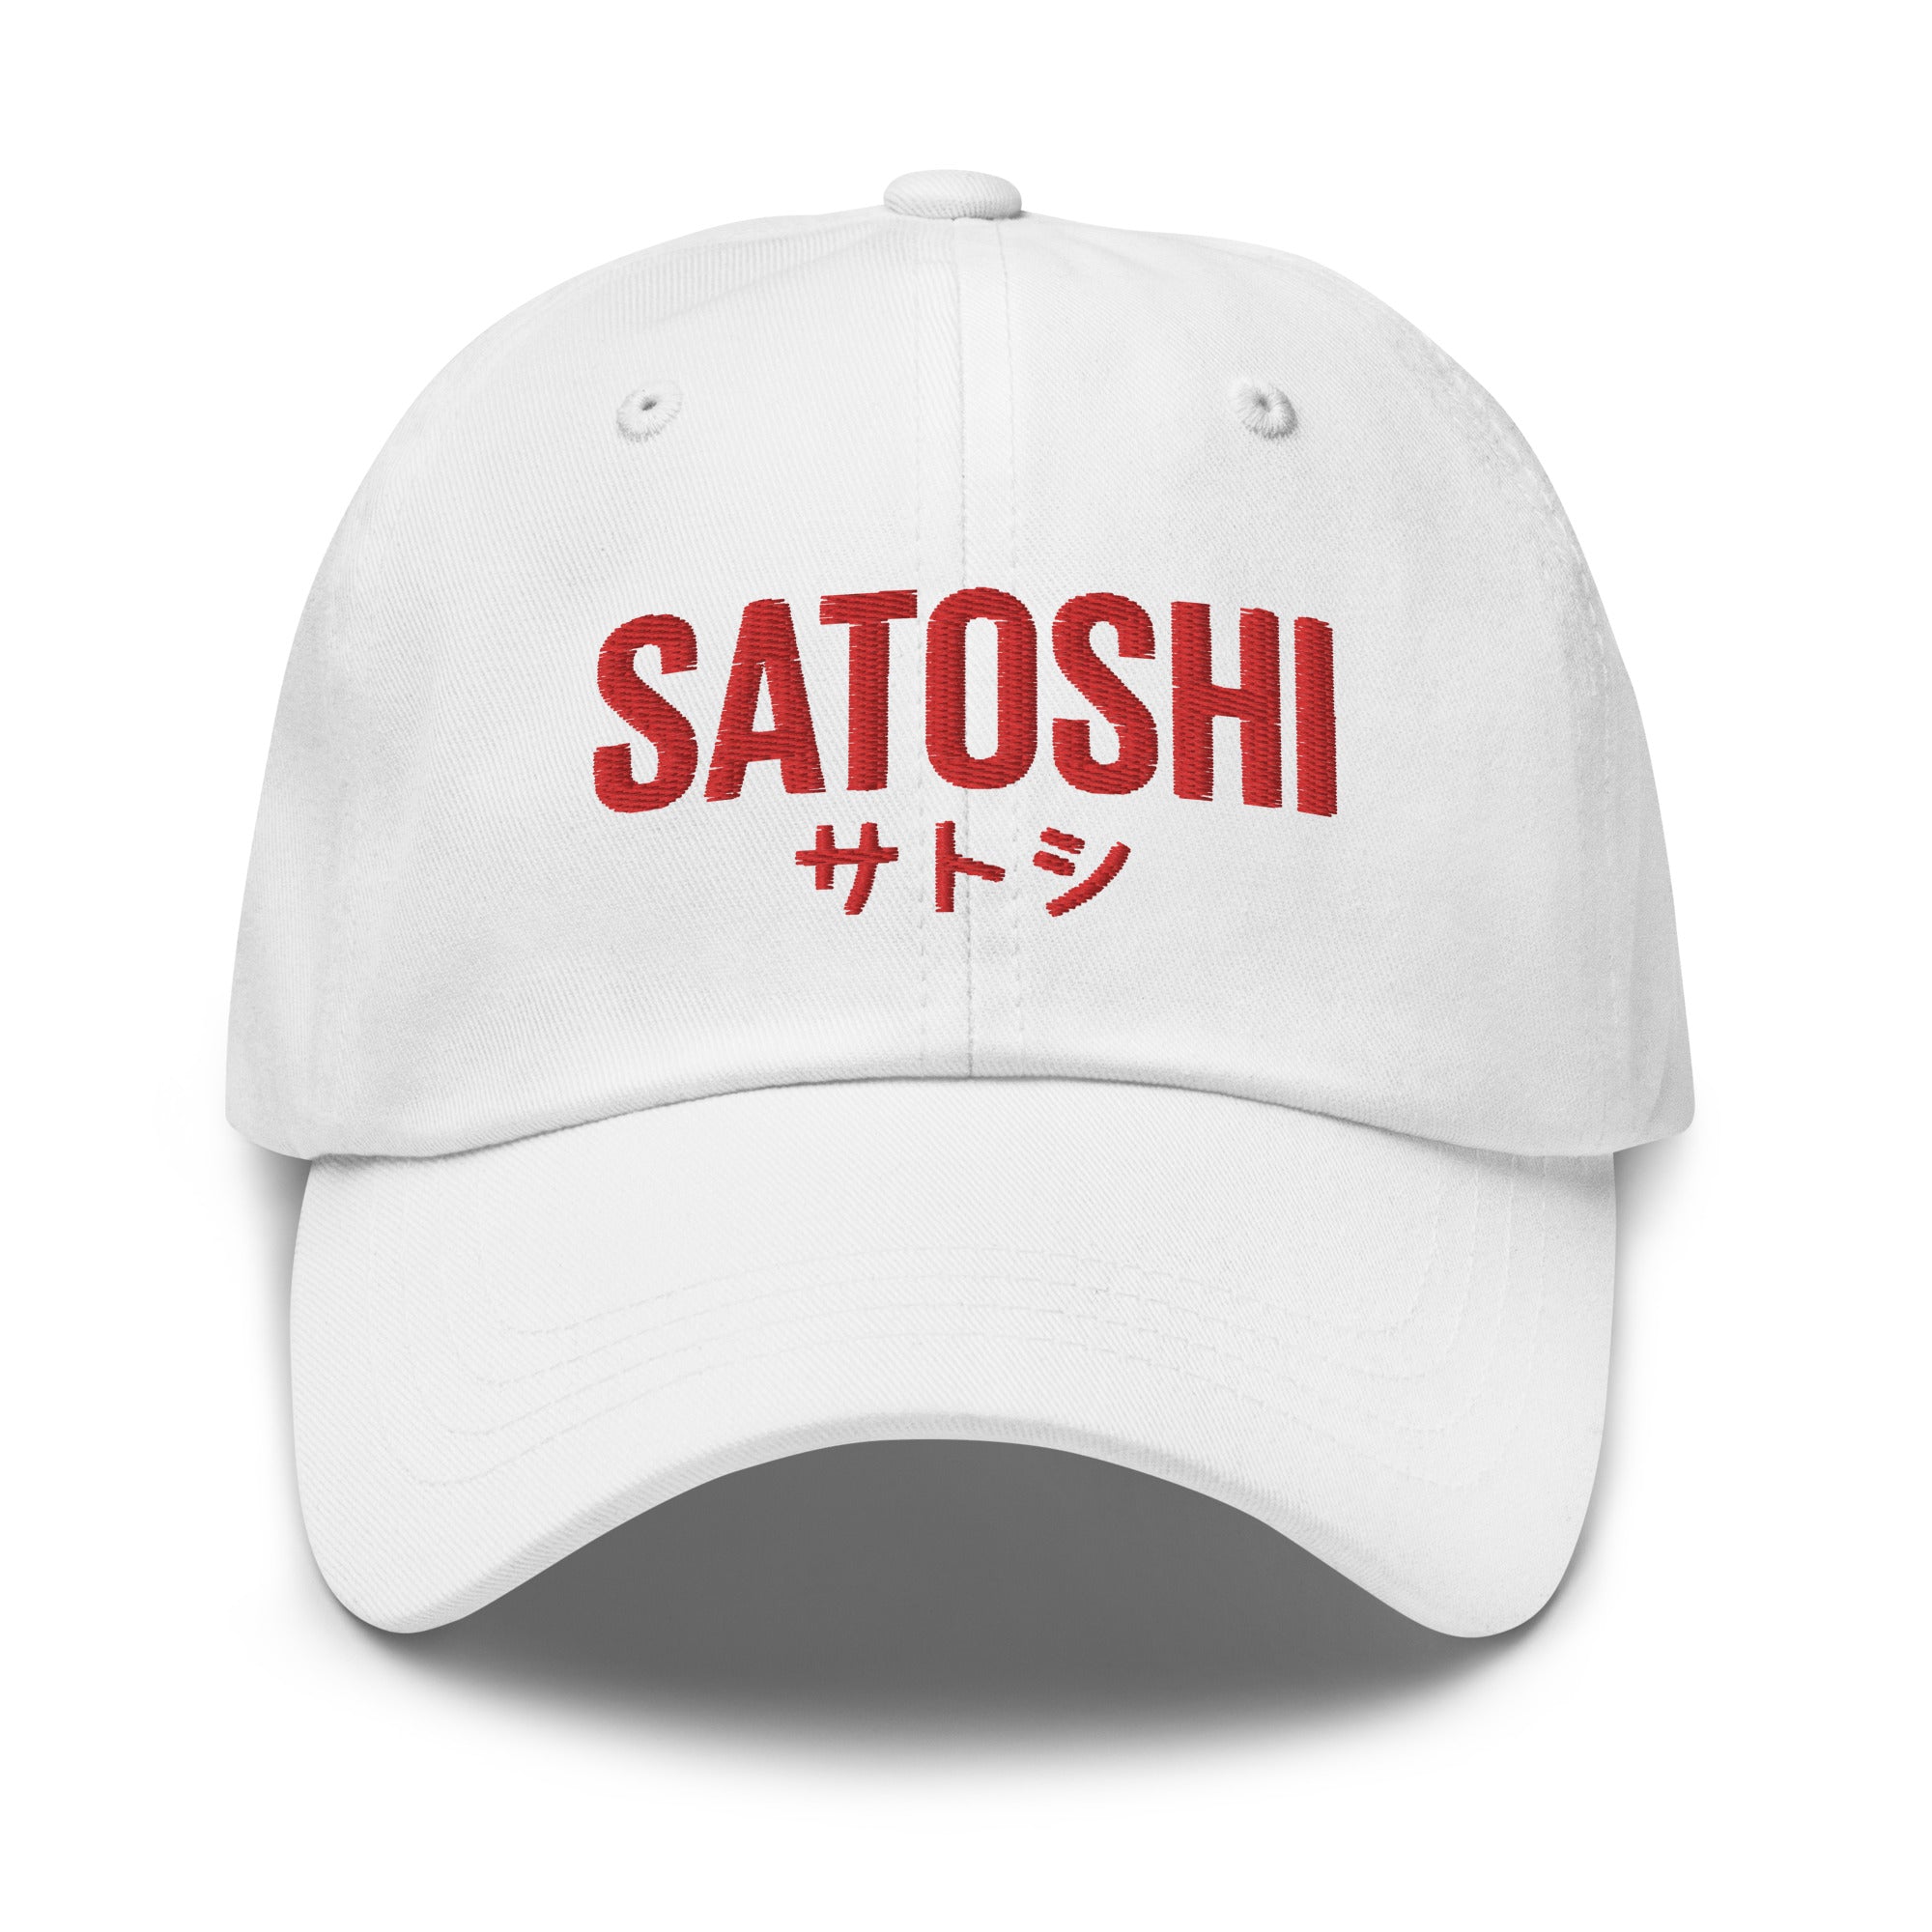 Bitcoin Headwear - The Satoshi Hat (Red Logo) features embroidered designs on the front and back of a white cap. Front view. 